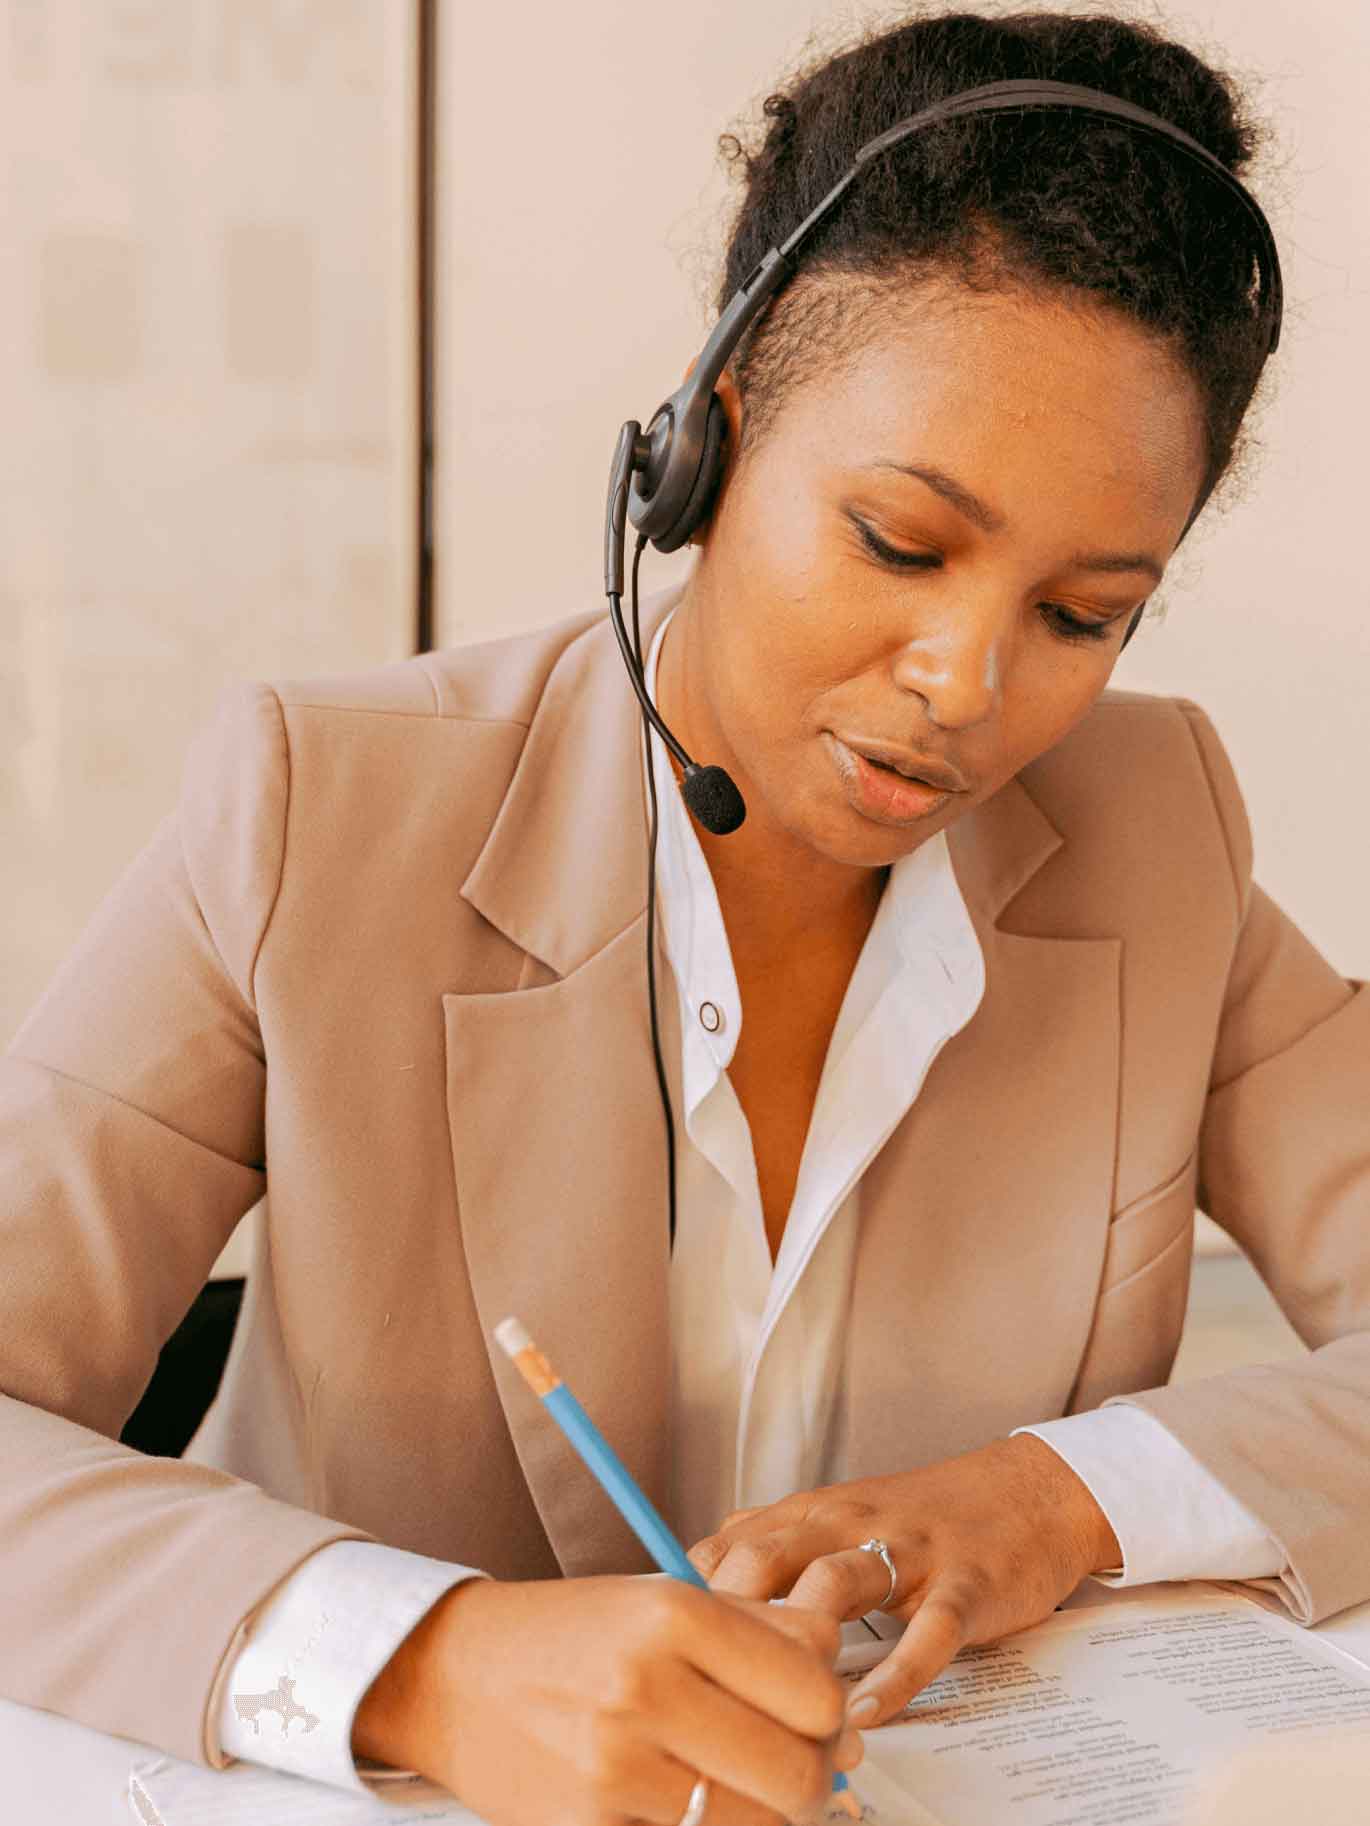 A woman with a headset sitting at a desk in an office